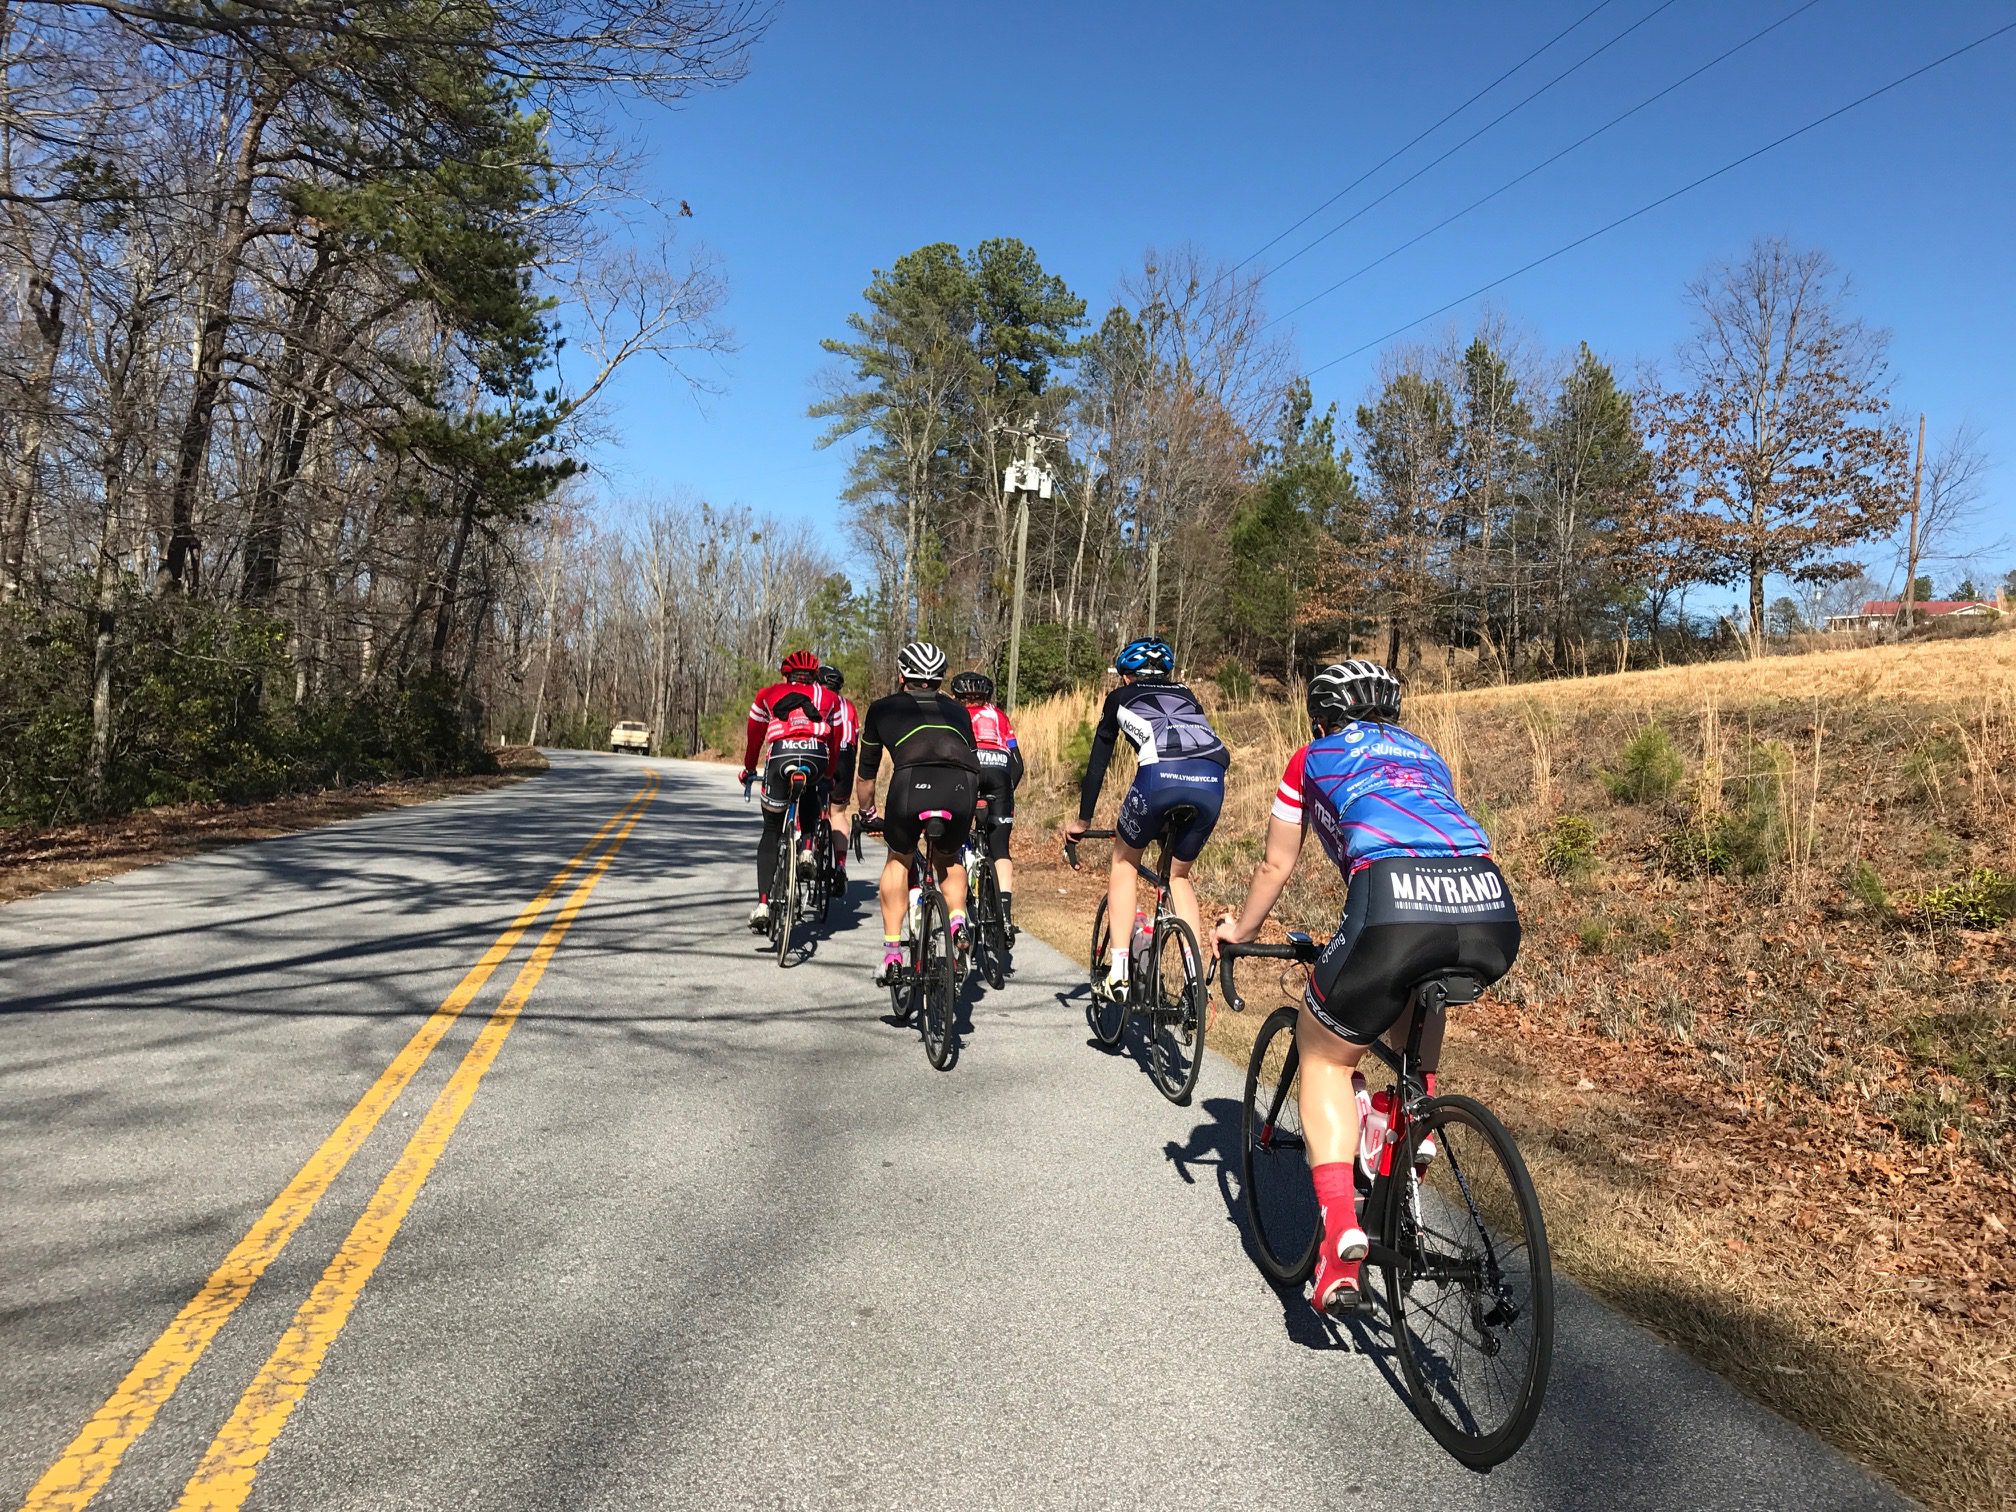 Easy group ride